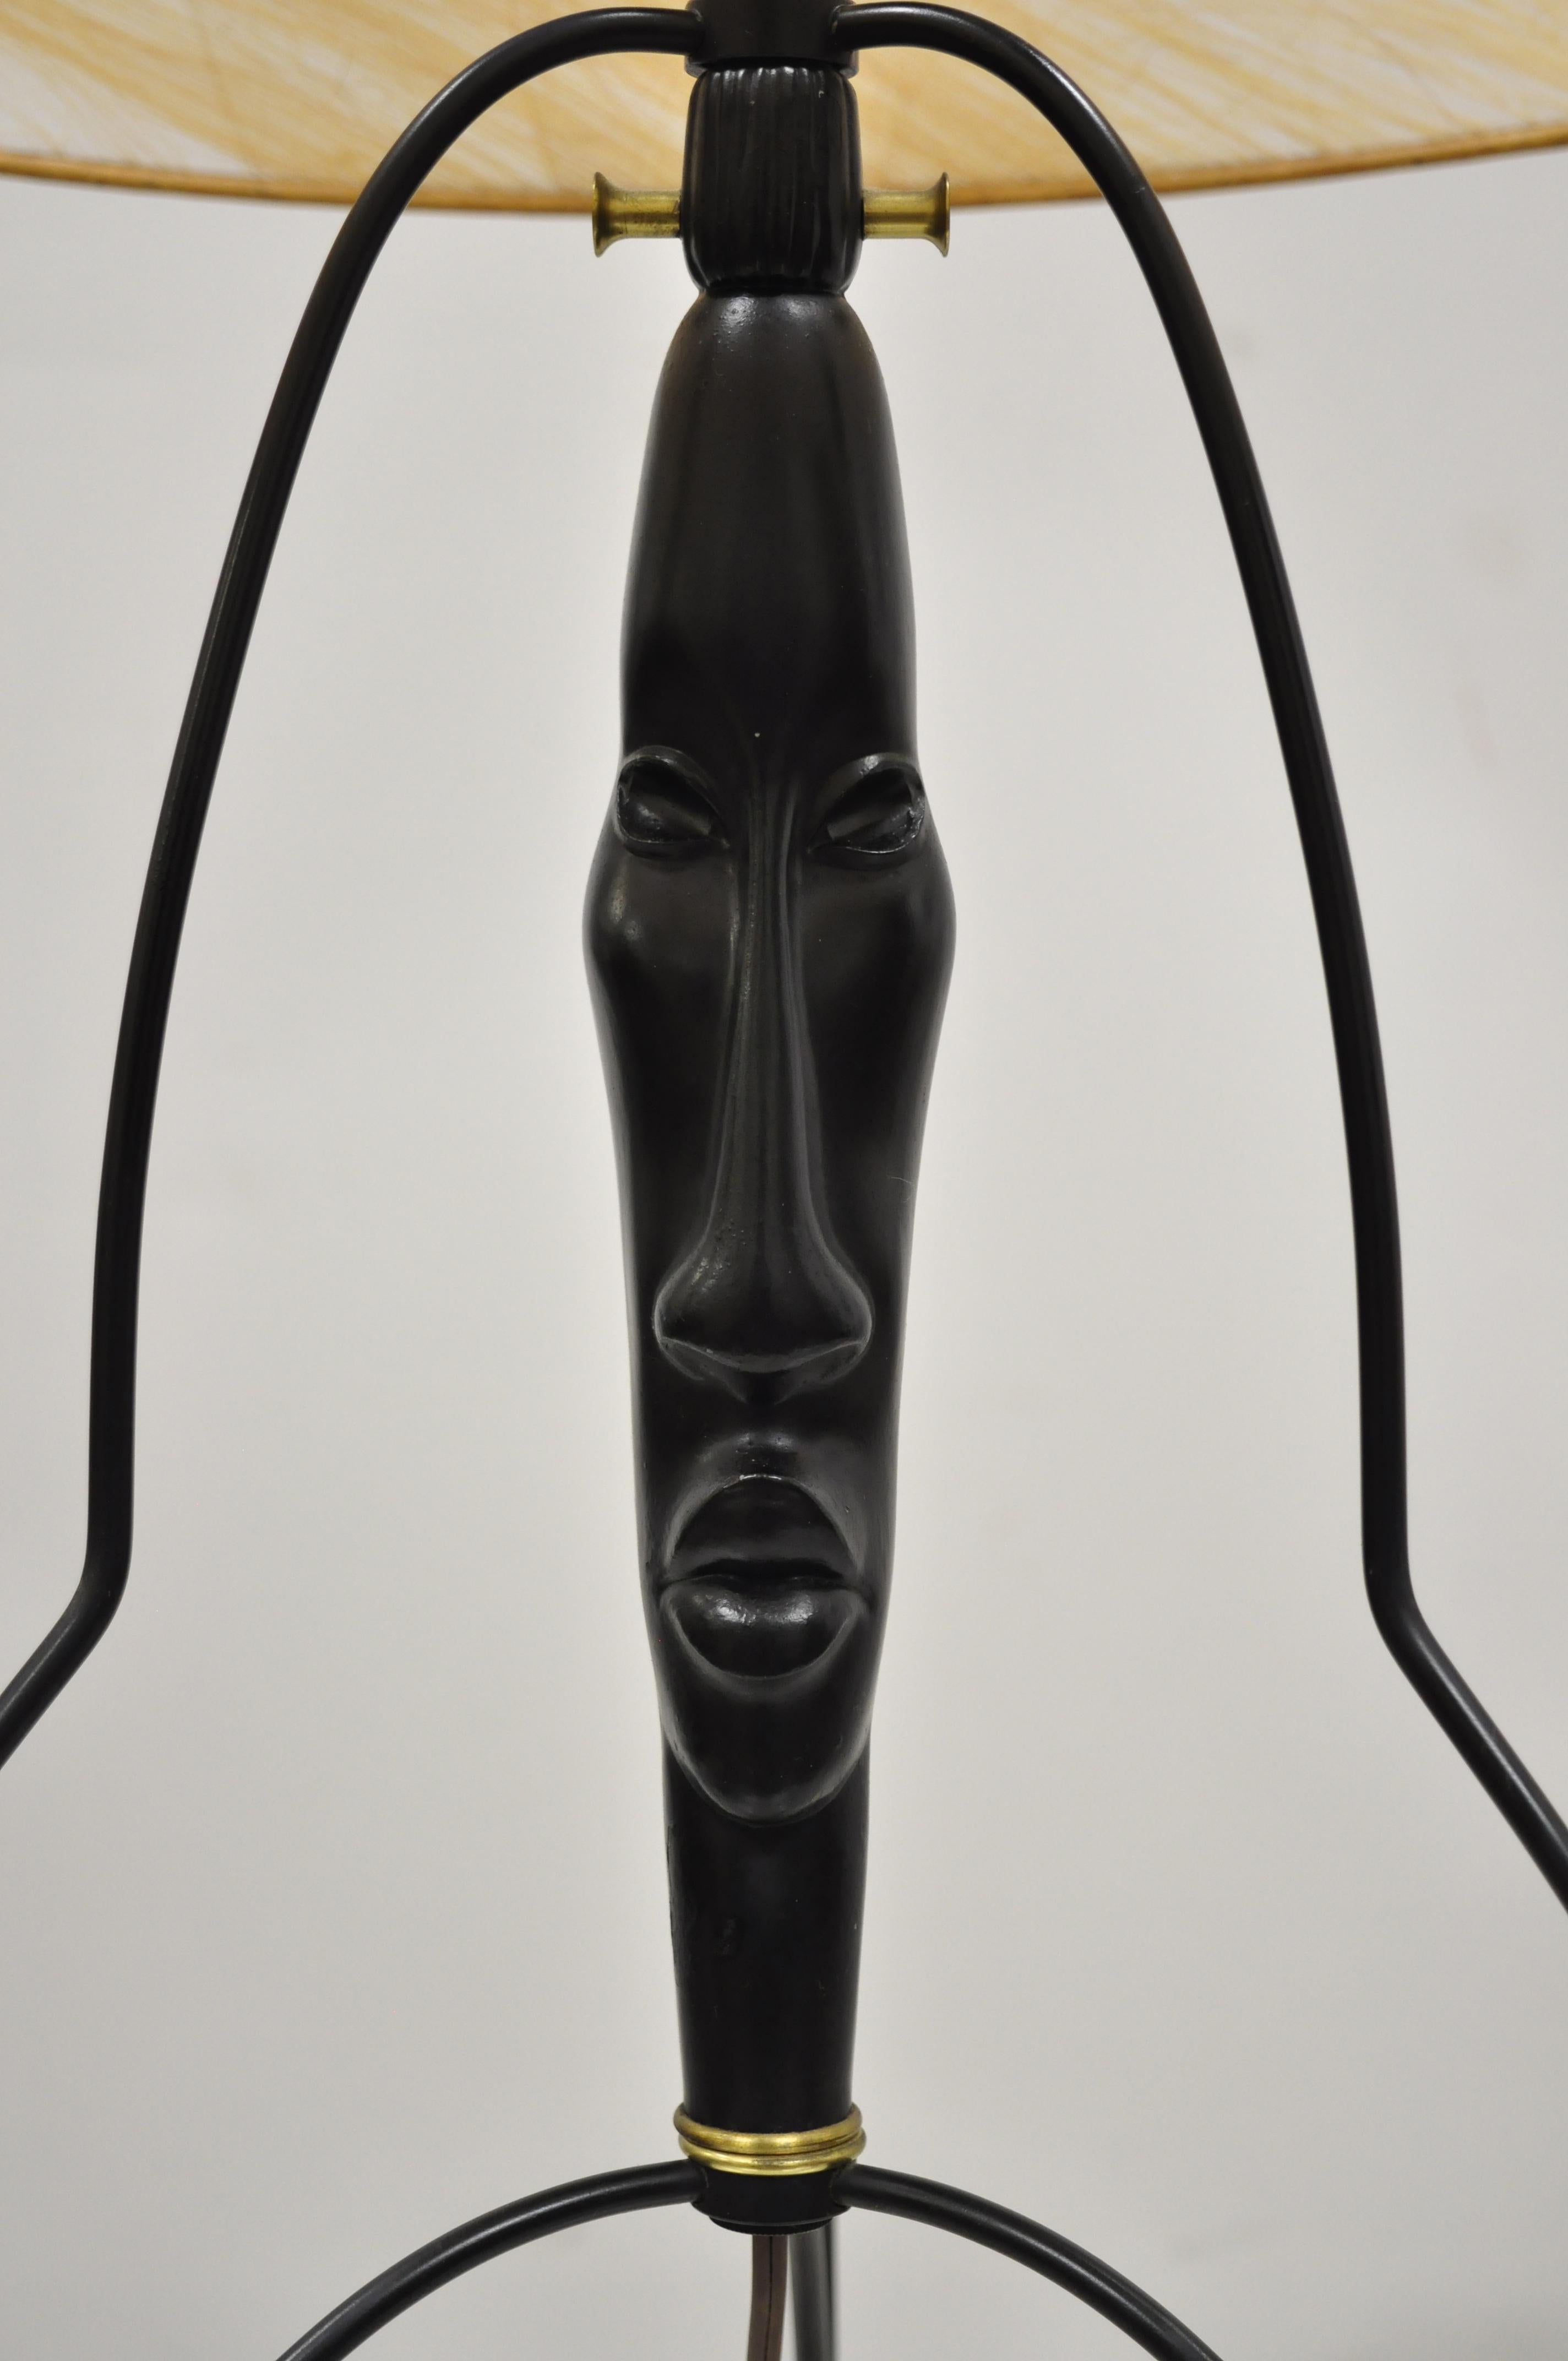 North American Mid-Century Modern Black Figural Bust Head Iron Table Lamp Frederick Weinberg For Sale